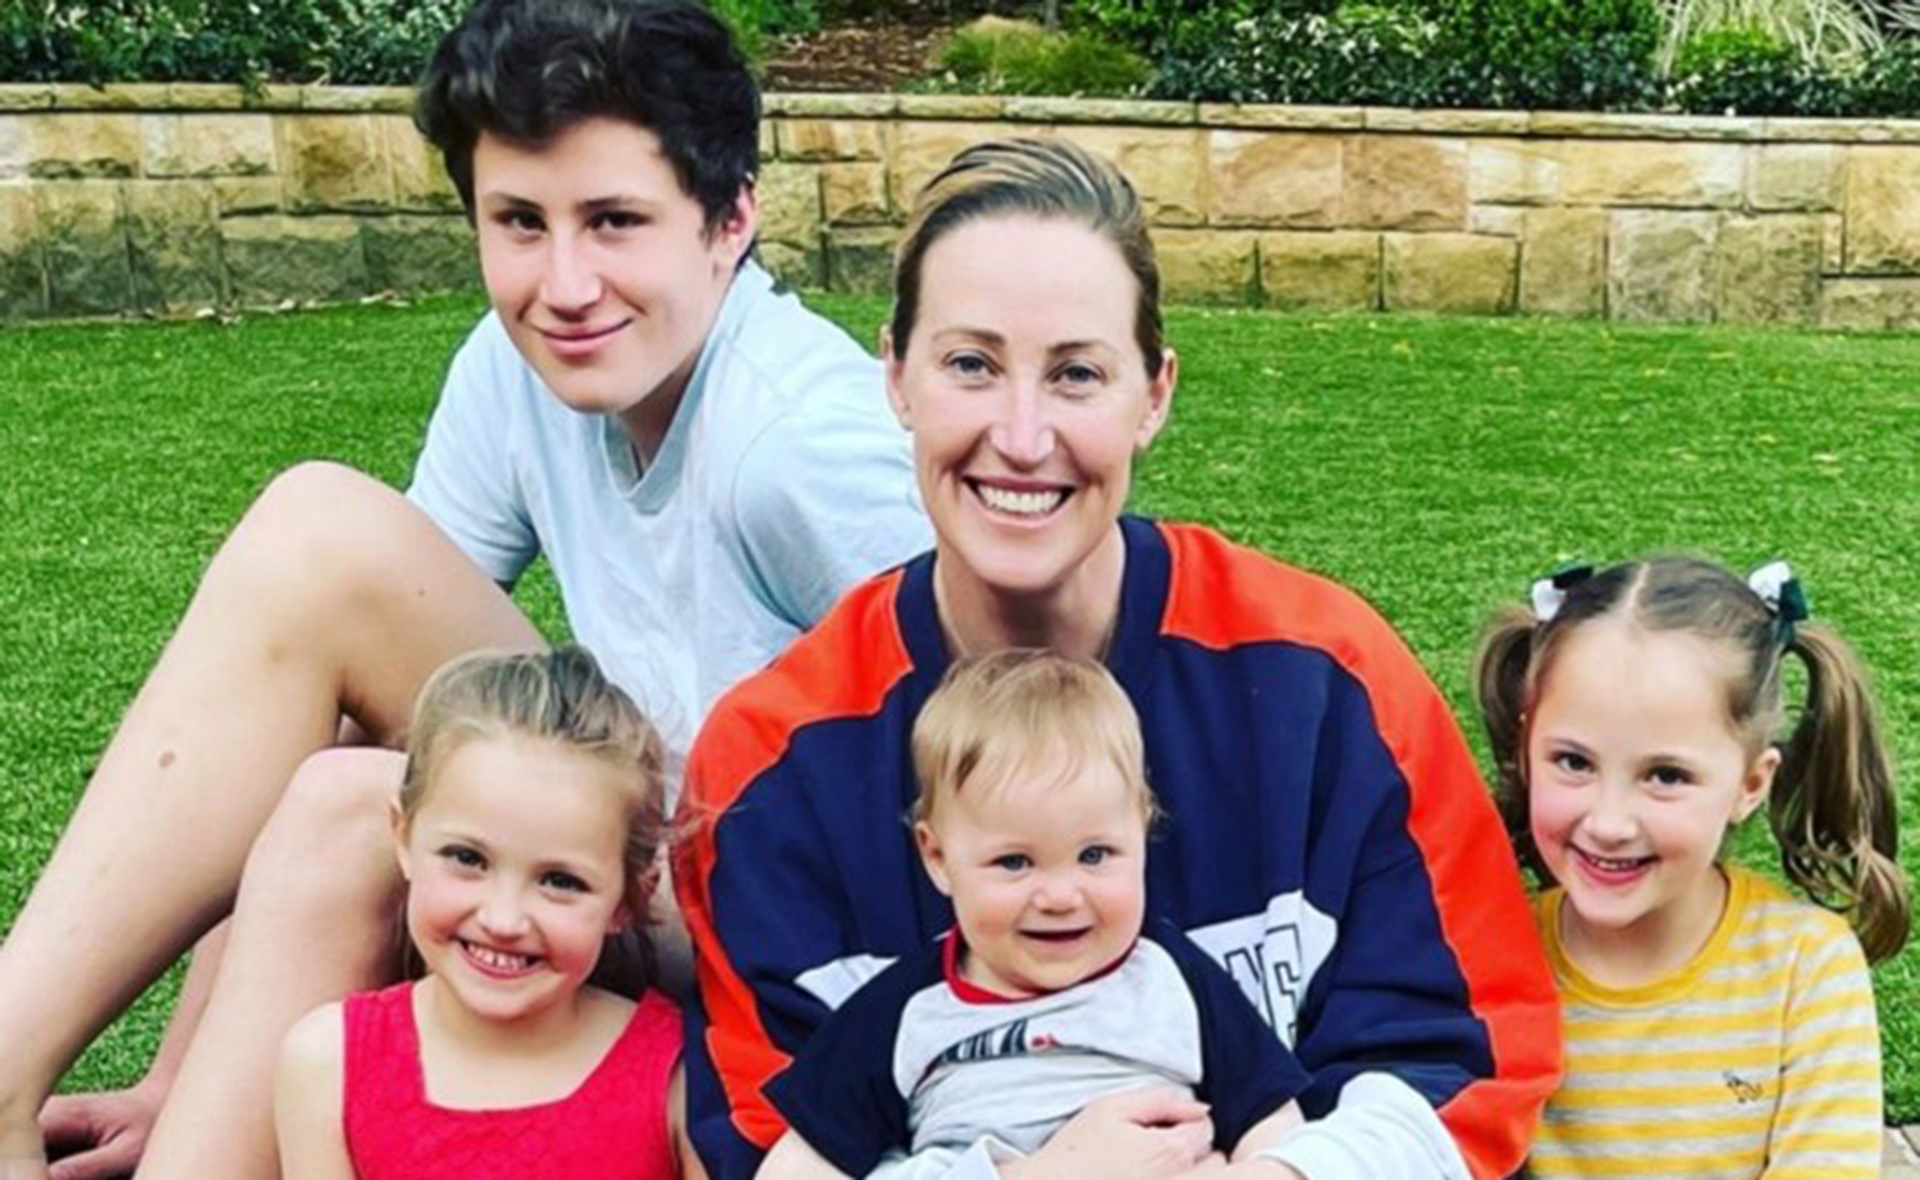 The selfless way supermum Jana Pittman helped her friends have kids: “We call it our rainbow family”